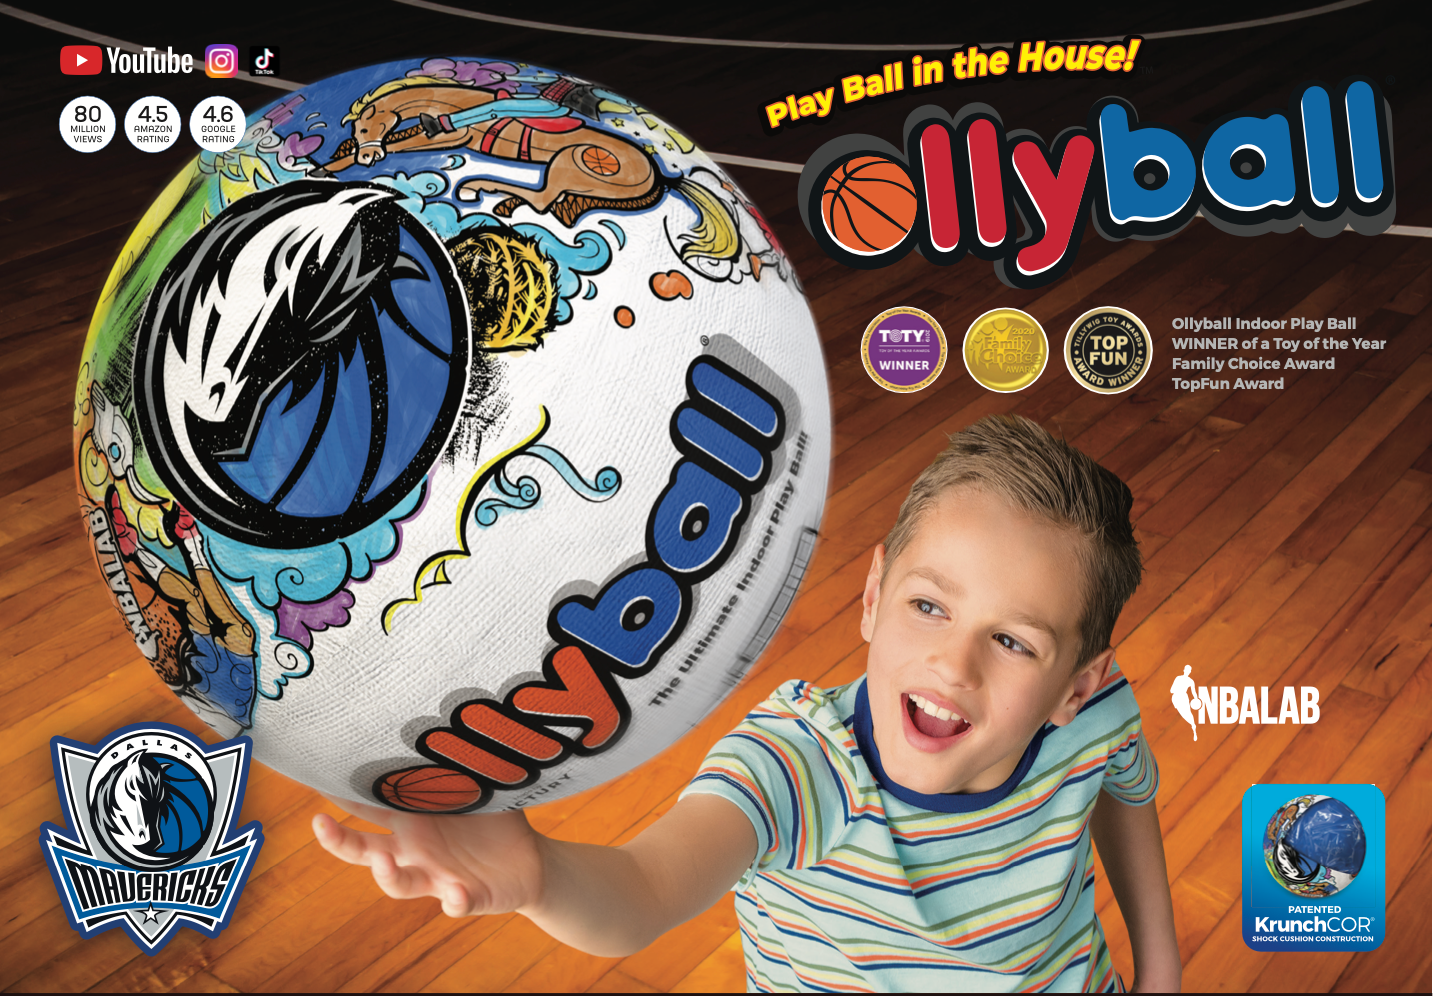 Ollyball GLOW Party! – Victury Sports 